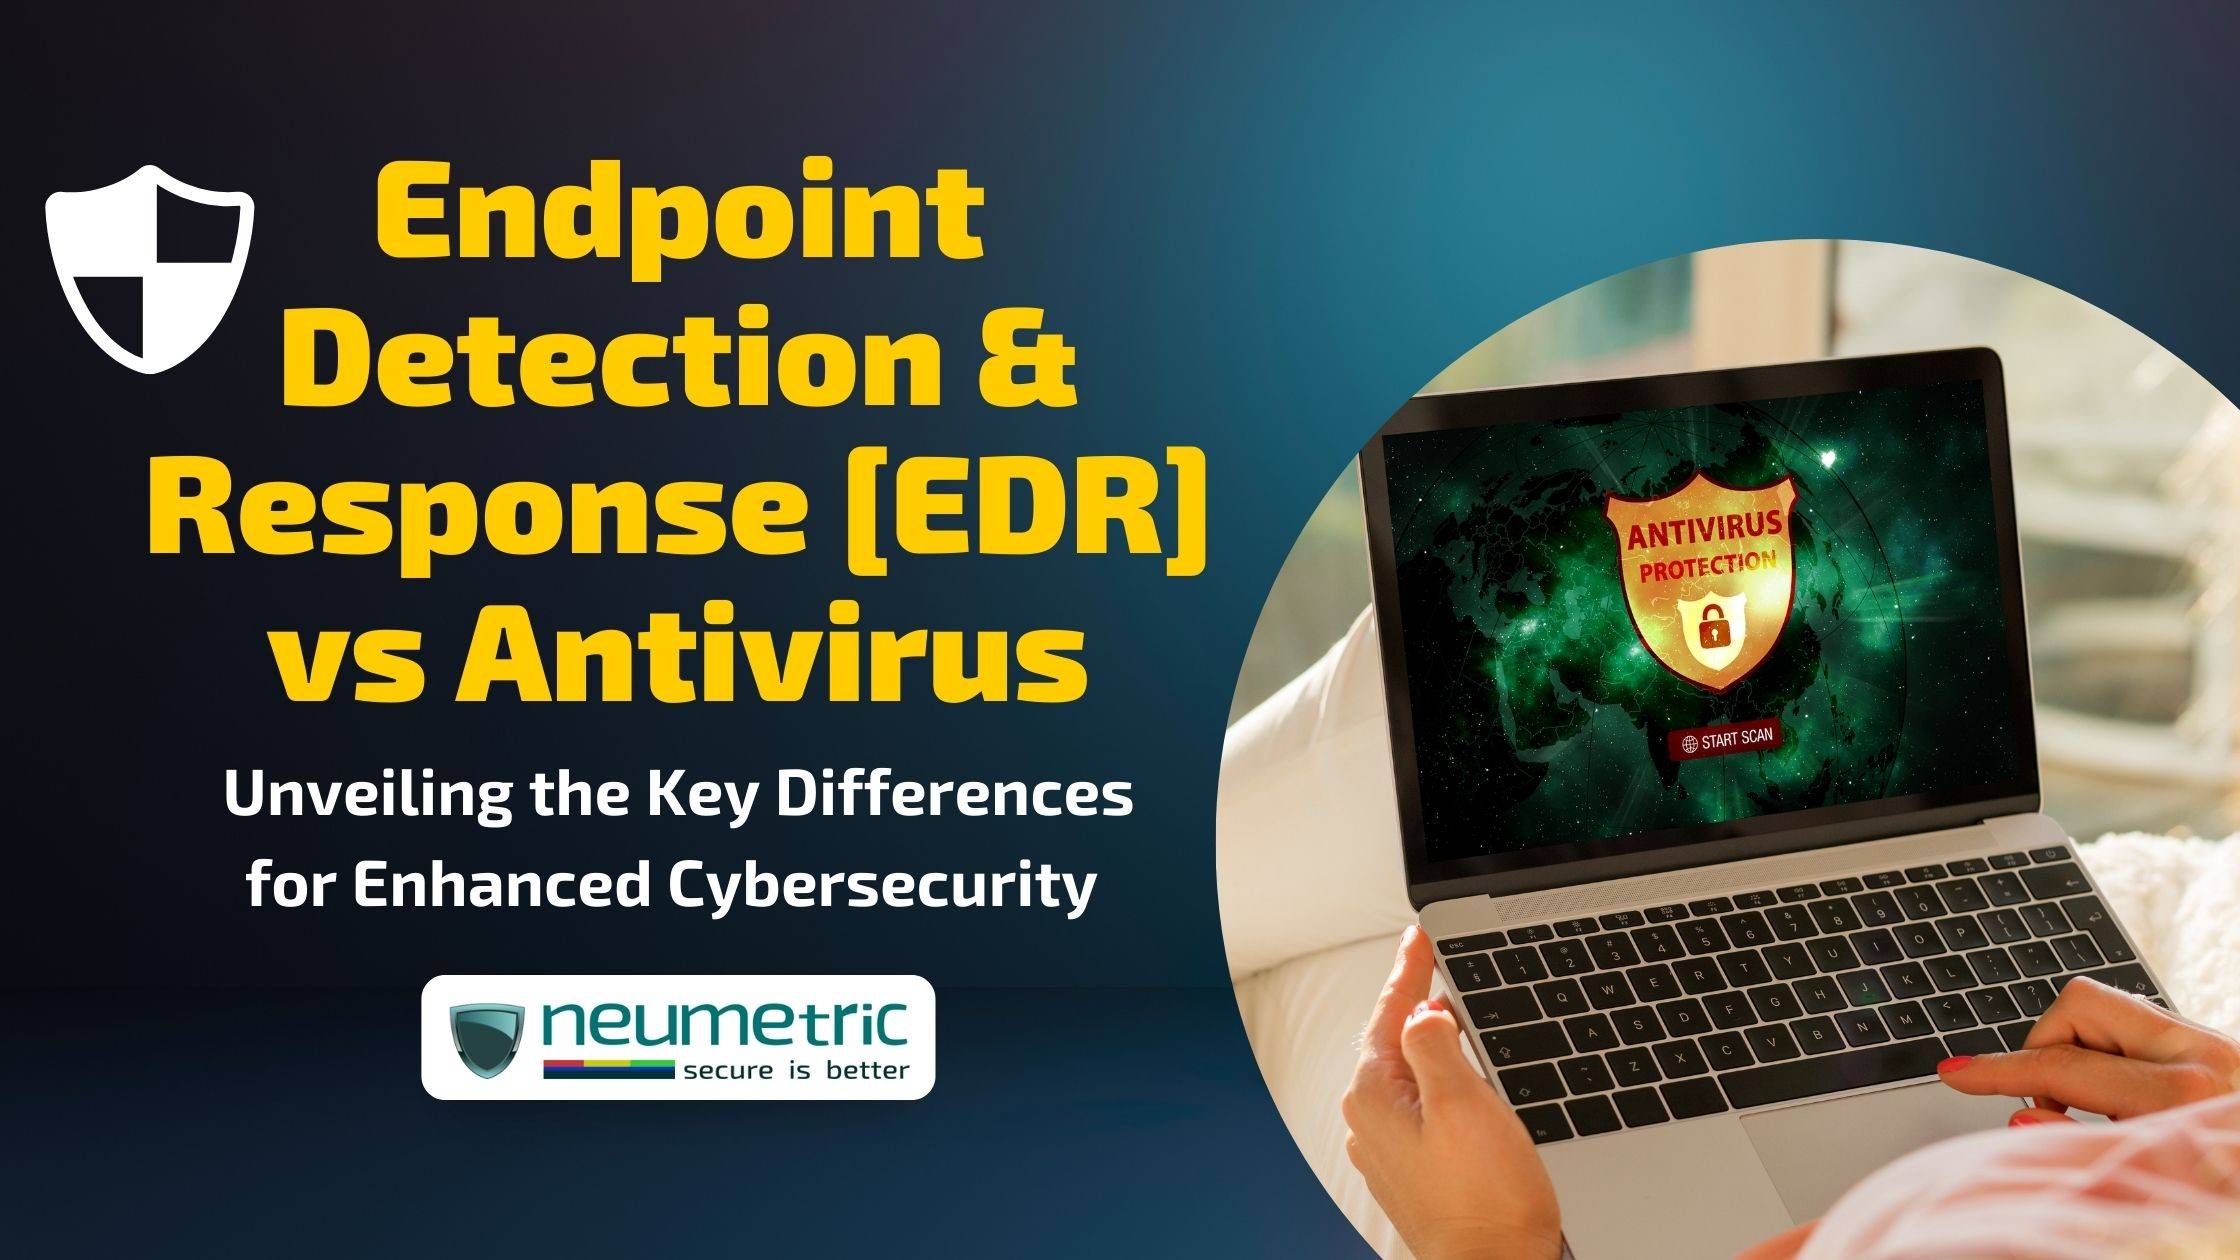 Endpoint Detection & Response [EDR] vs Antivirus: Unveiling the Key Differences